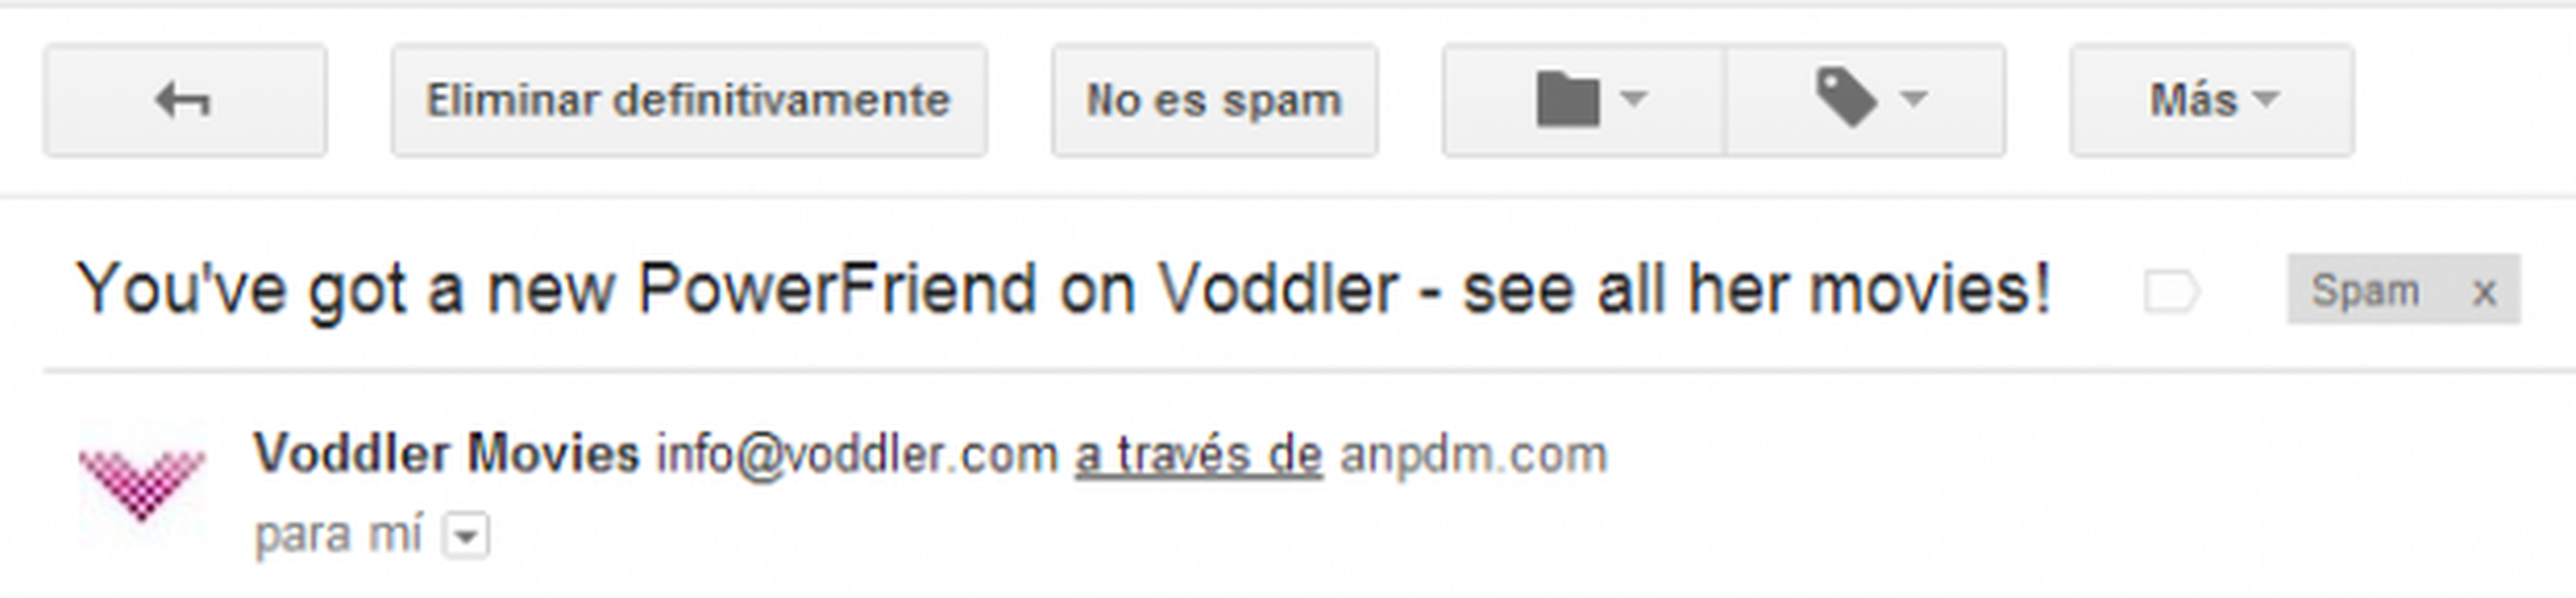 opciones email spam gmail